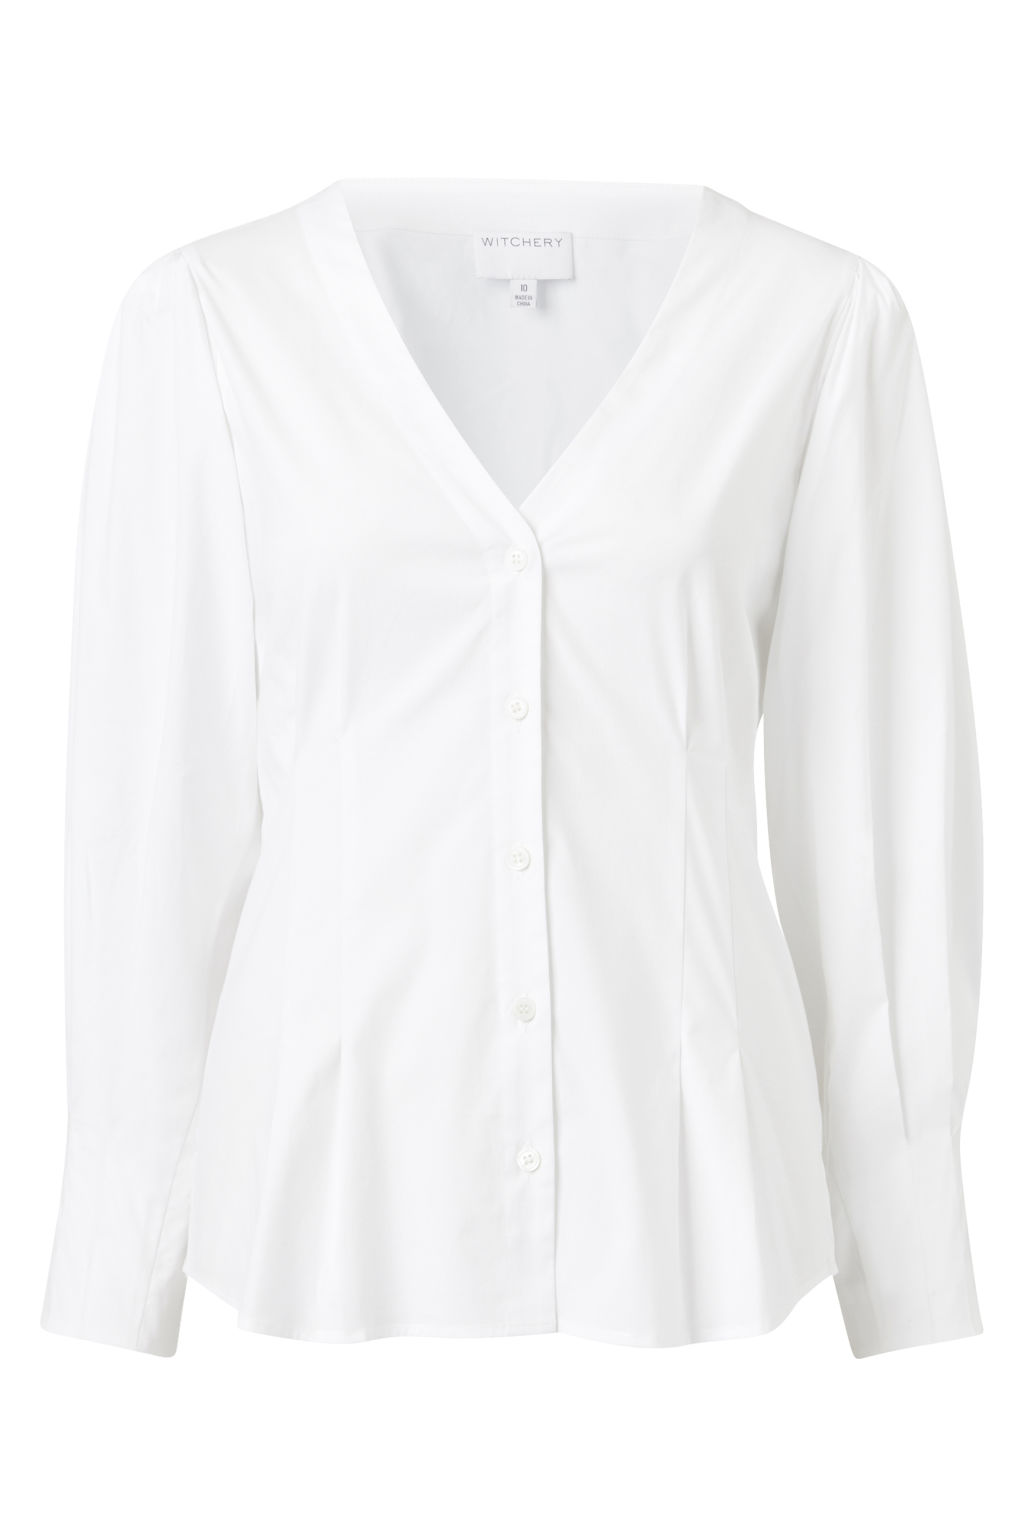 Witchery White Shirt campaign for OCRF and the Queen Victoria Night ...